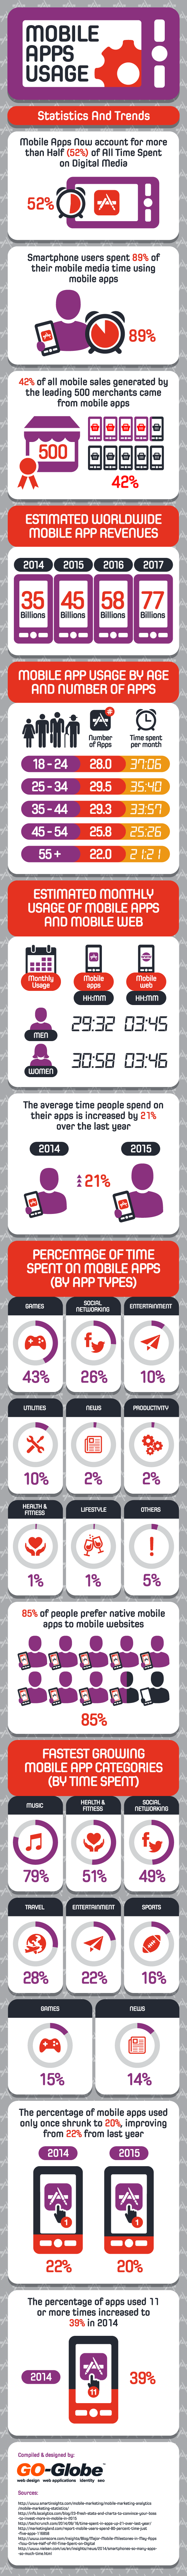 mobile-apps-usage